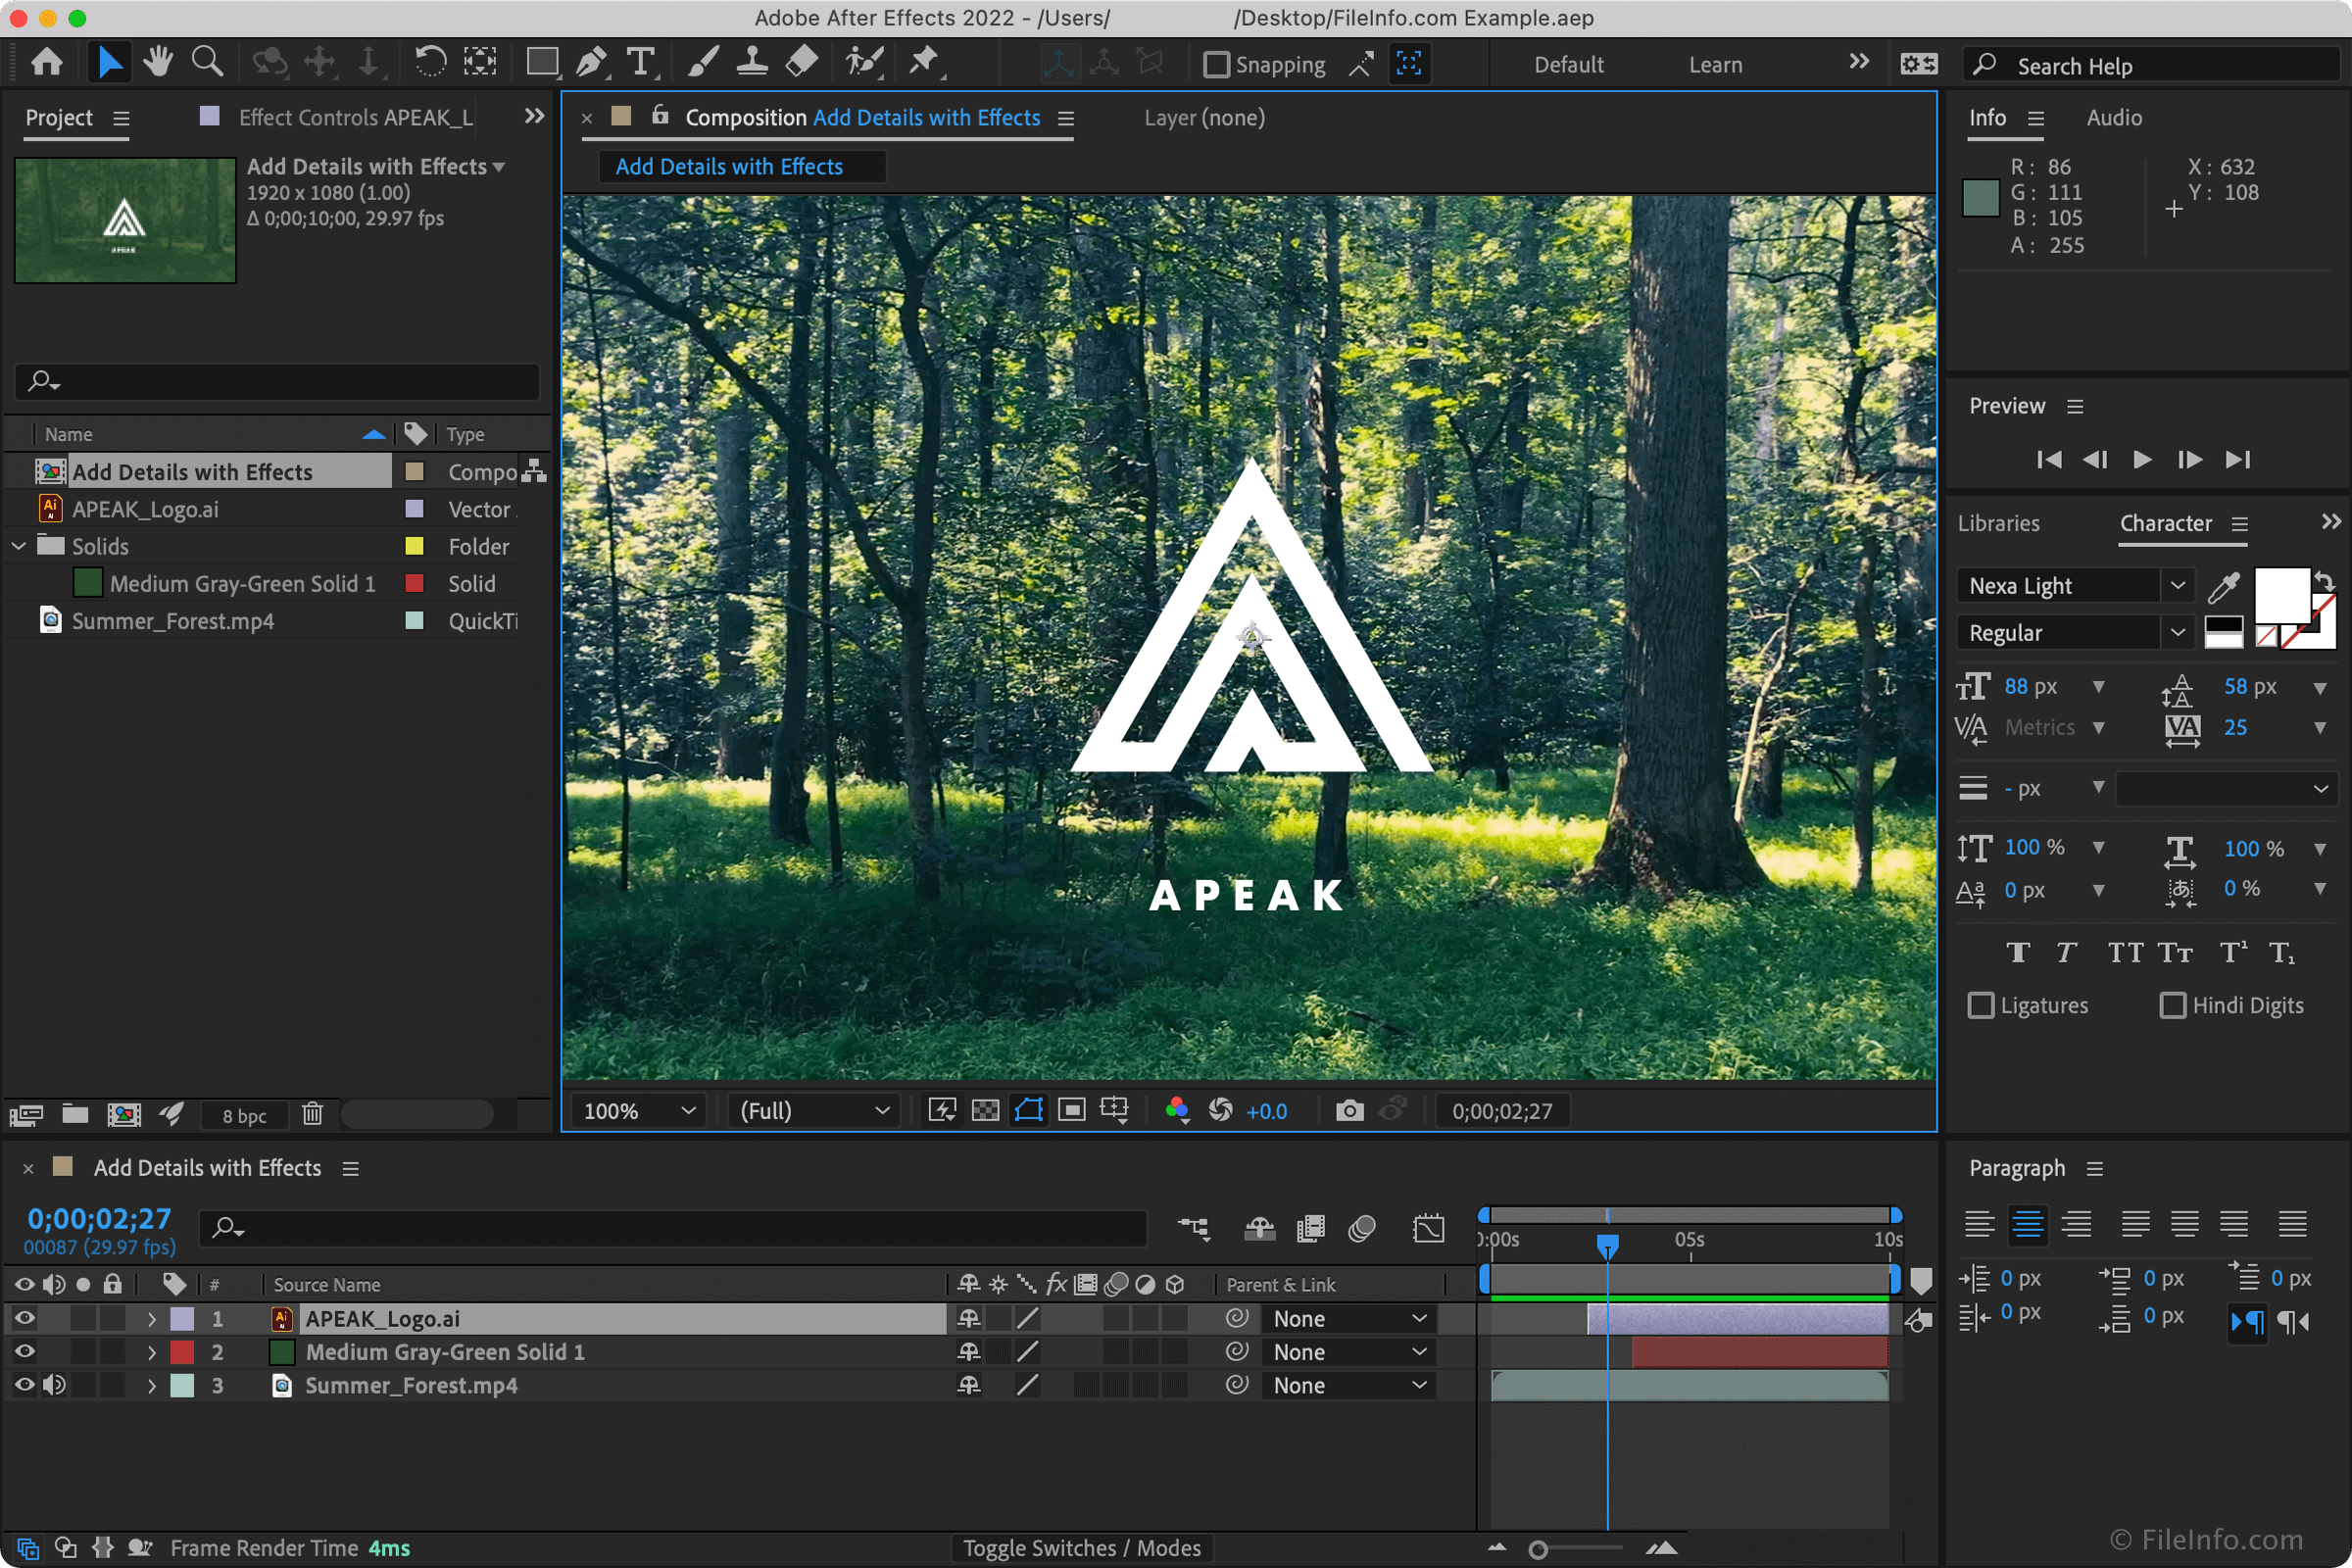 Adobe After Effects 2022 Overview and Supported File Types